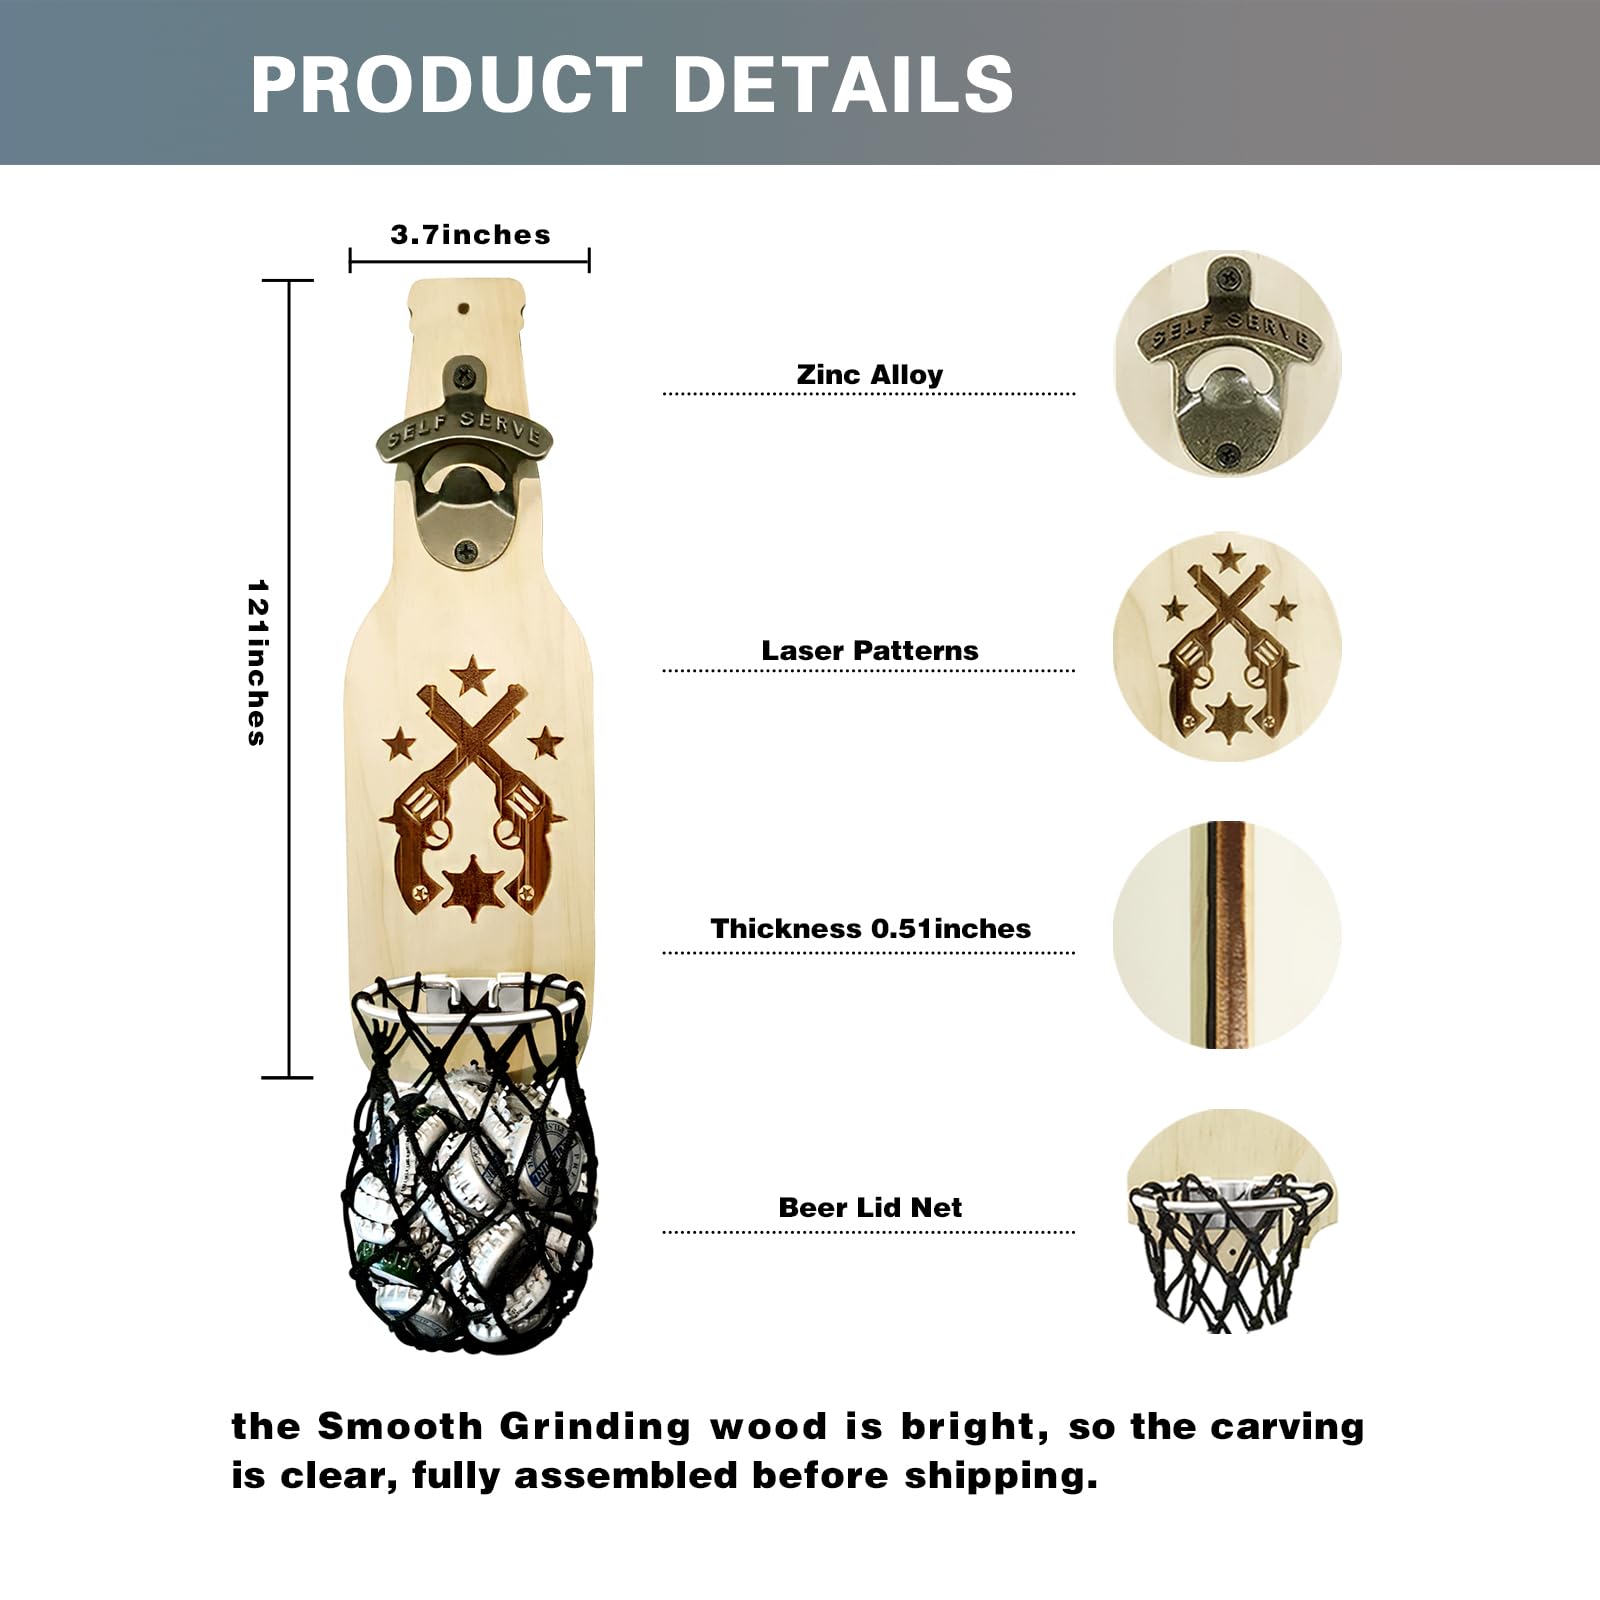 KingLive Bottle Opener - Funny Beer Bottle Opener with Wall Mounted Cap Catcher, Fun and Unique Gifts for Men, Dad, Father, Him, Perfect for Kitchen, Living Room, Bedroom, Outdoor, and Bar Decor